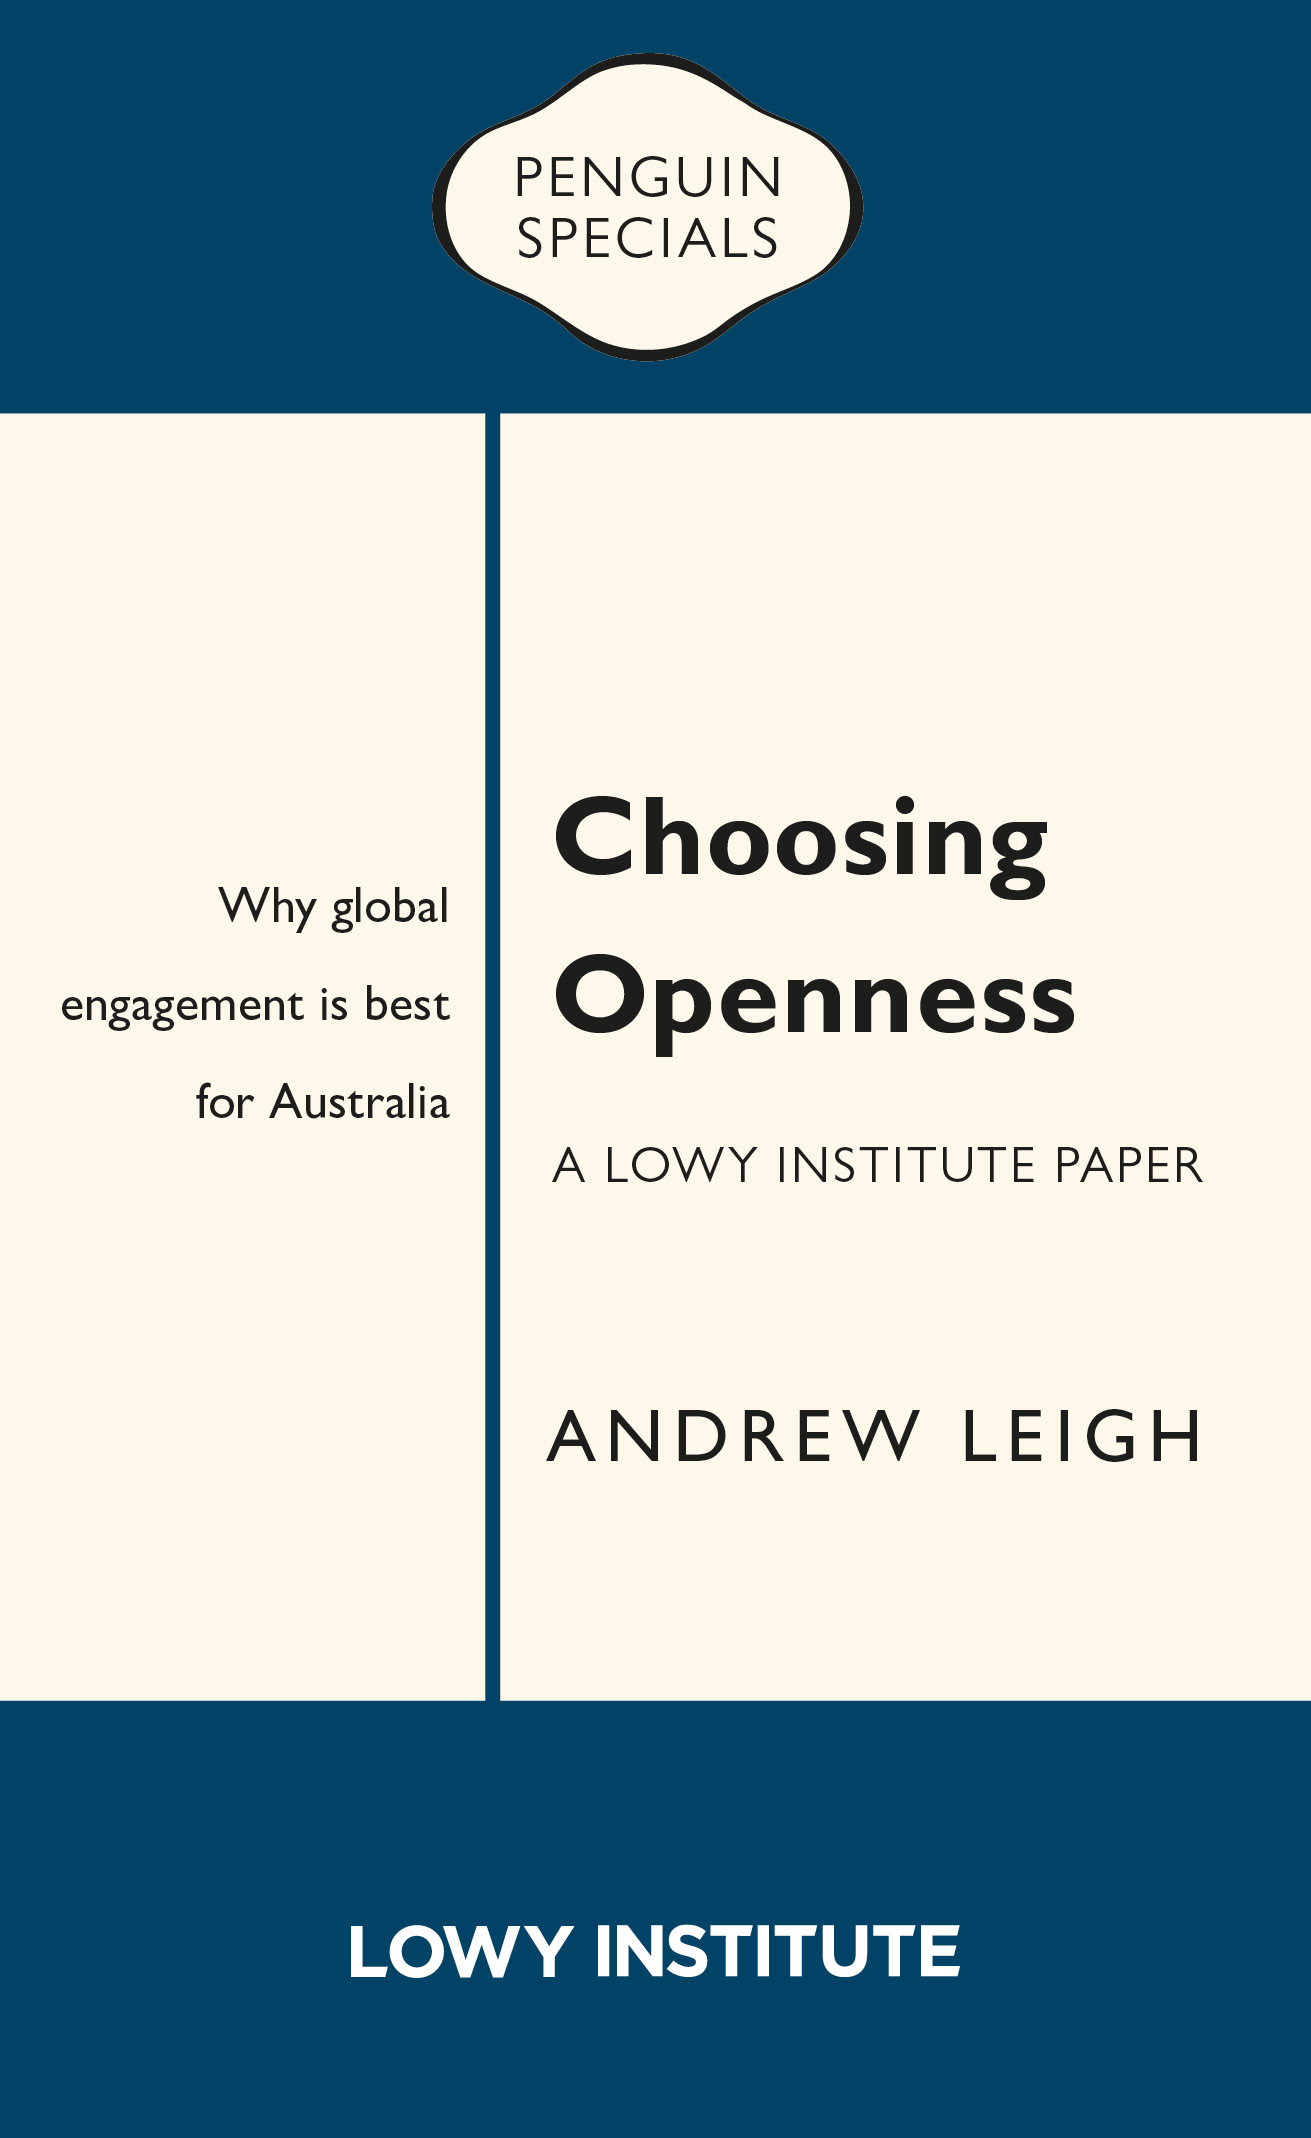 Discussing ”Choosing Openness” with Lowy Institute Executive Director Michael Fullilove